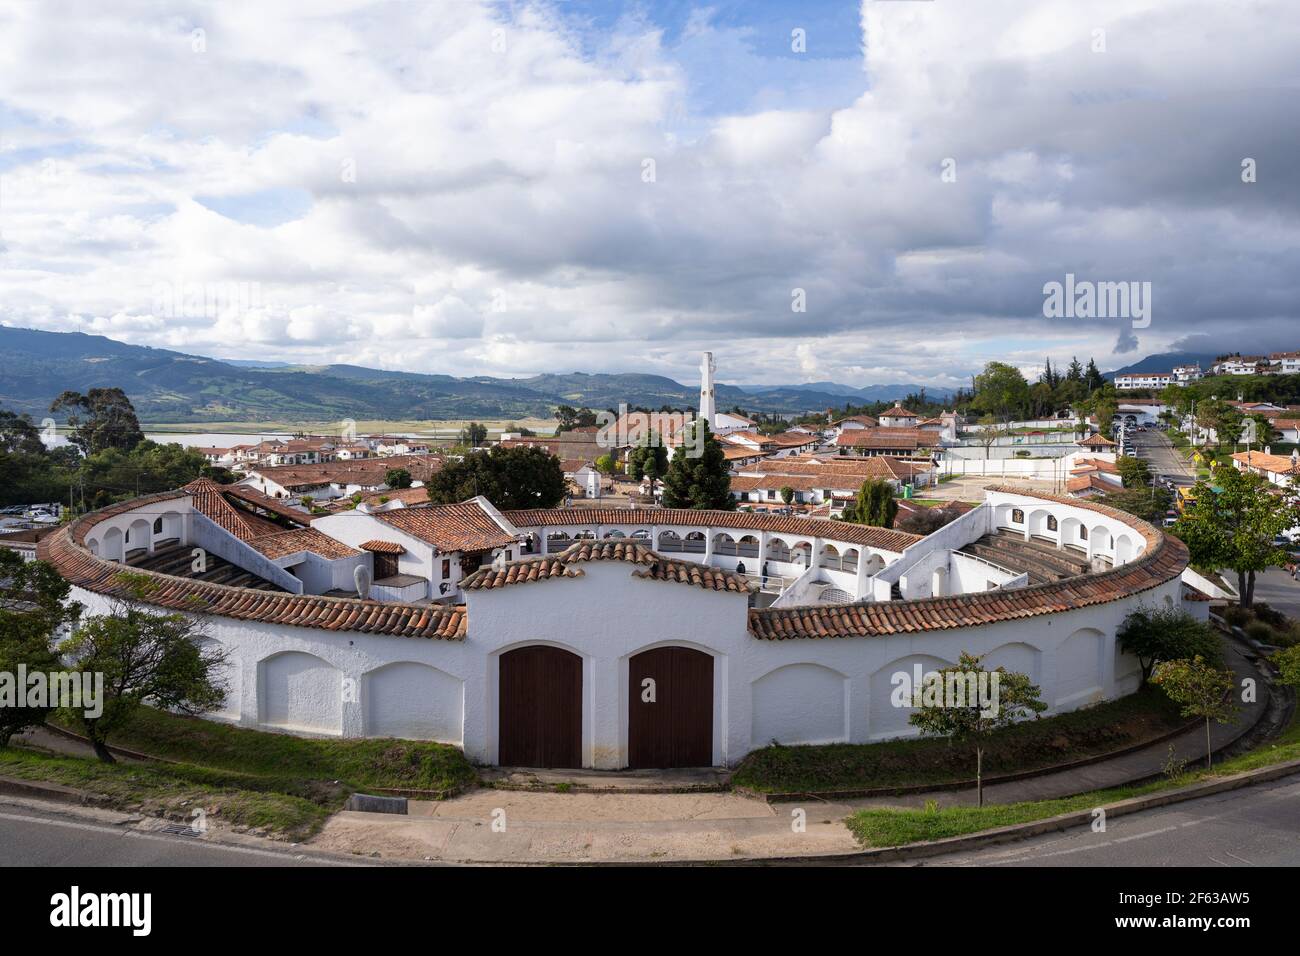 view of the village and arena of Guatavita, Cundinamarca, Colombia Stock Photo